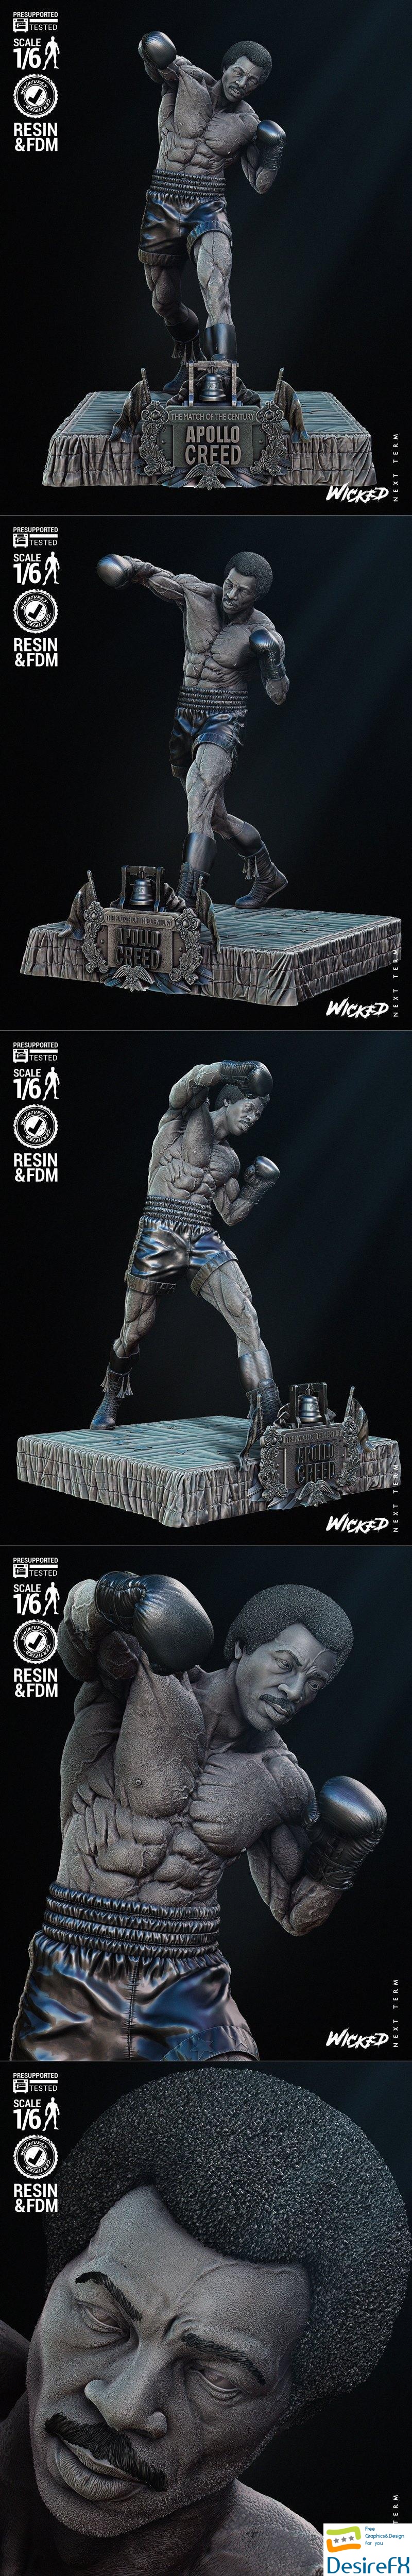 Wicked - Apollo Creed Sculpture 3D Print